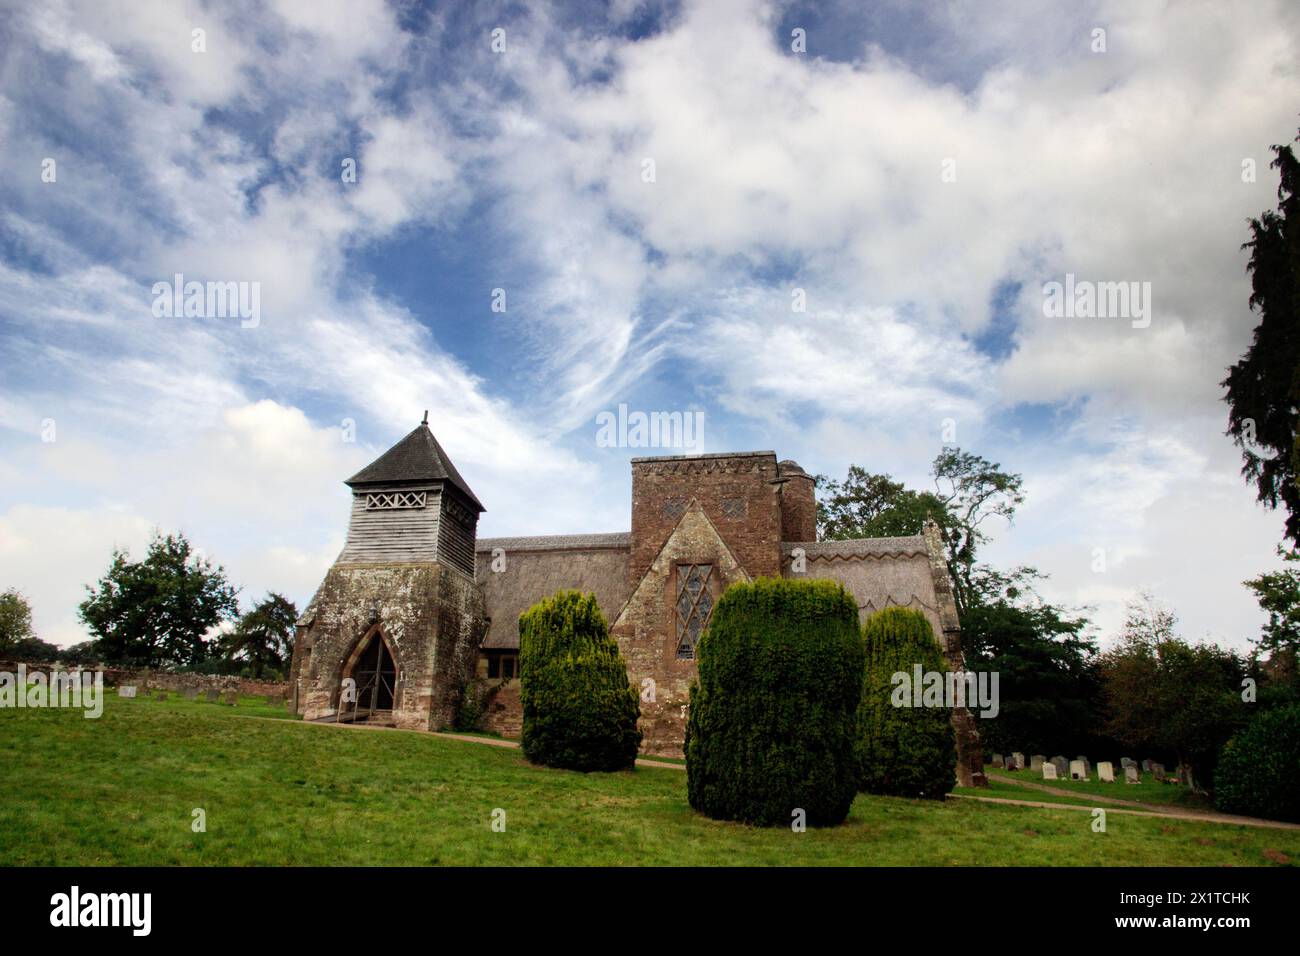 All Saints’ Church, Brockhampton, a Grade I listed building, was designed and built in 1902 by William Lethaby, a leading Arts and Crafts architect. Stock Photo